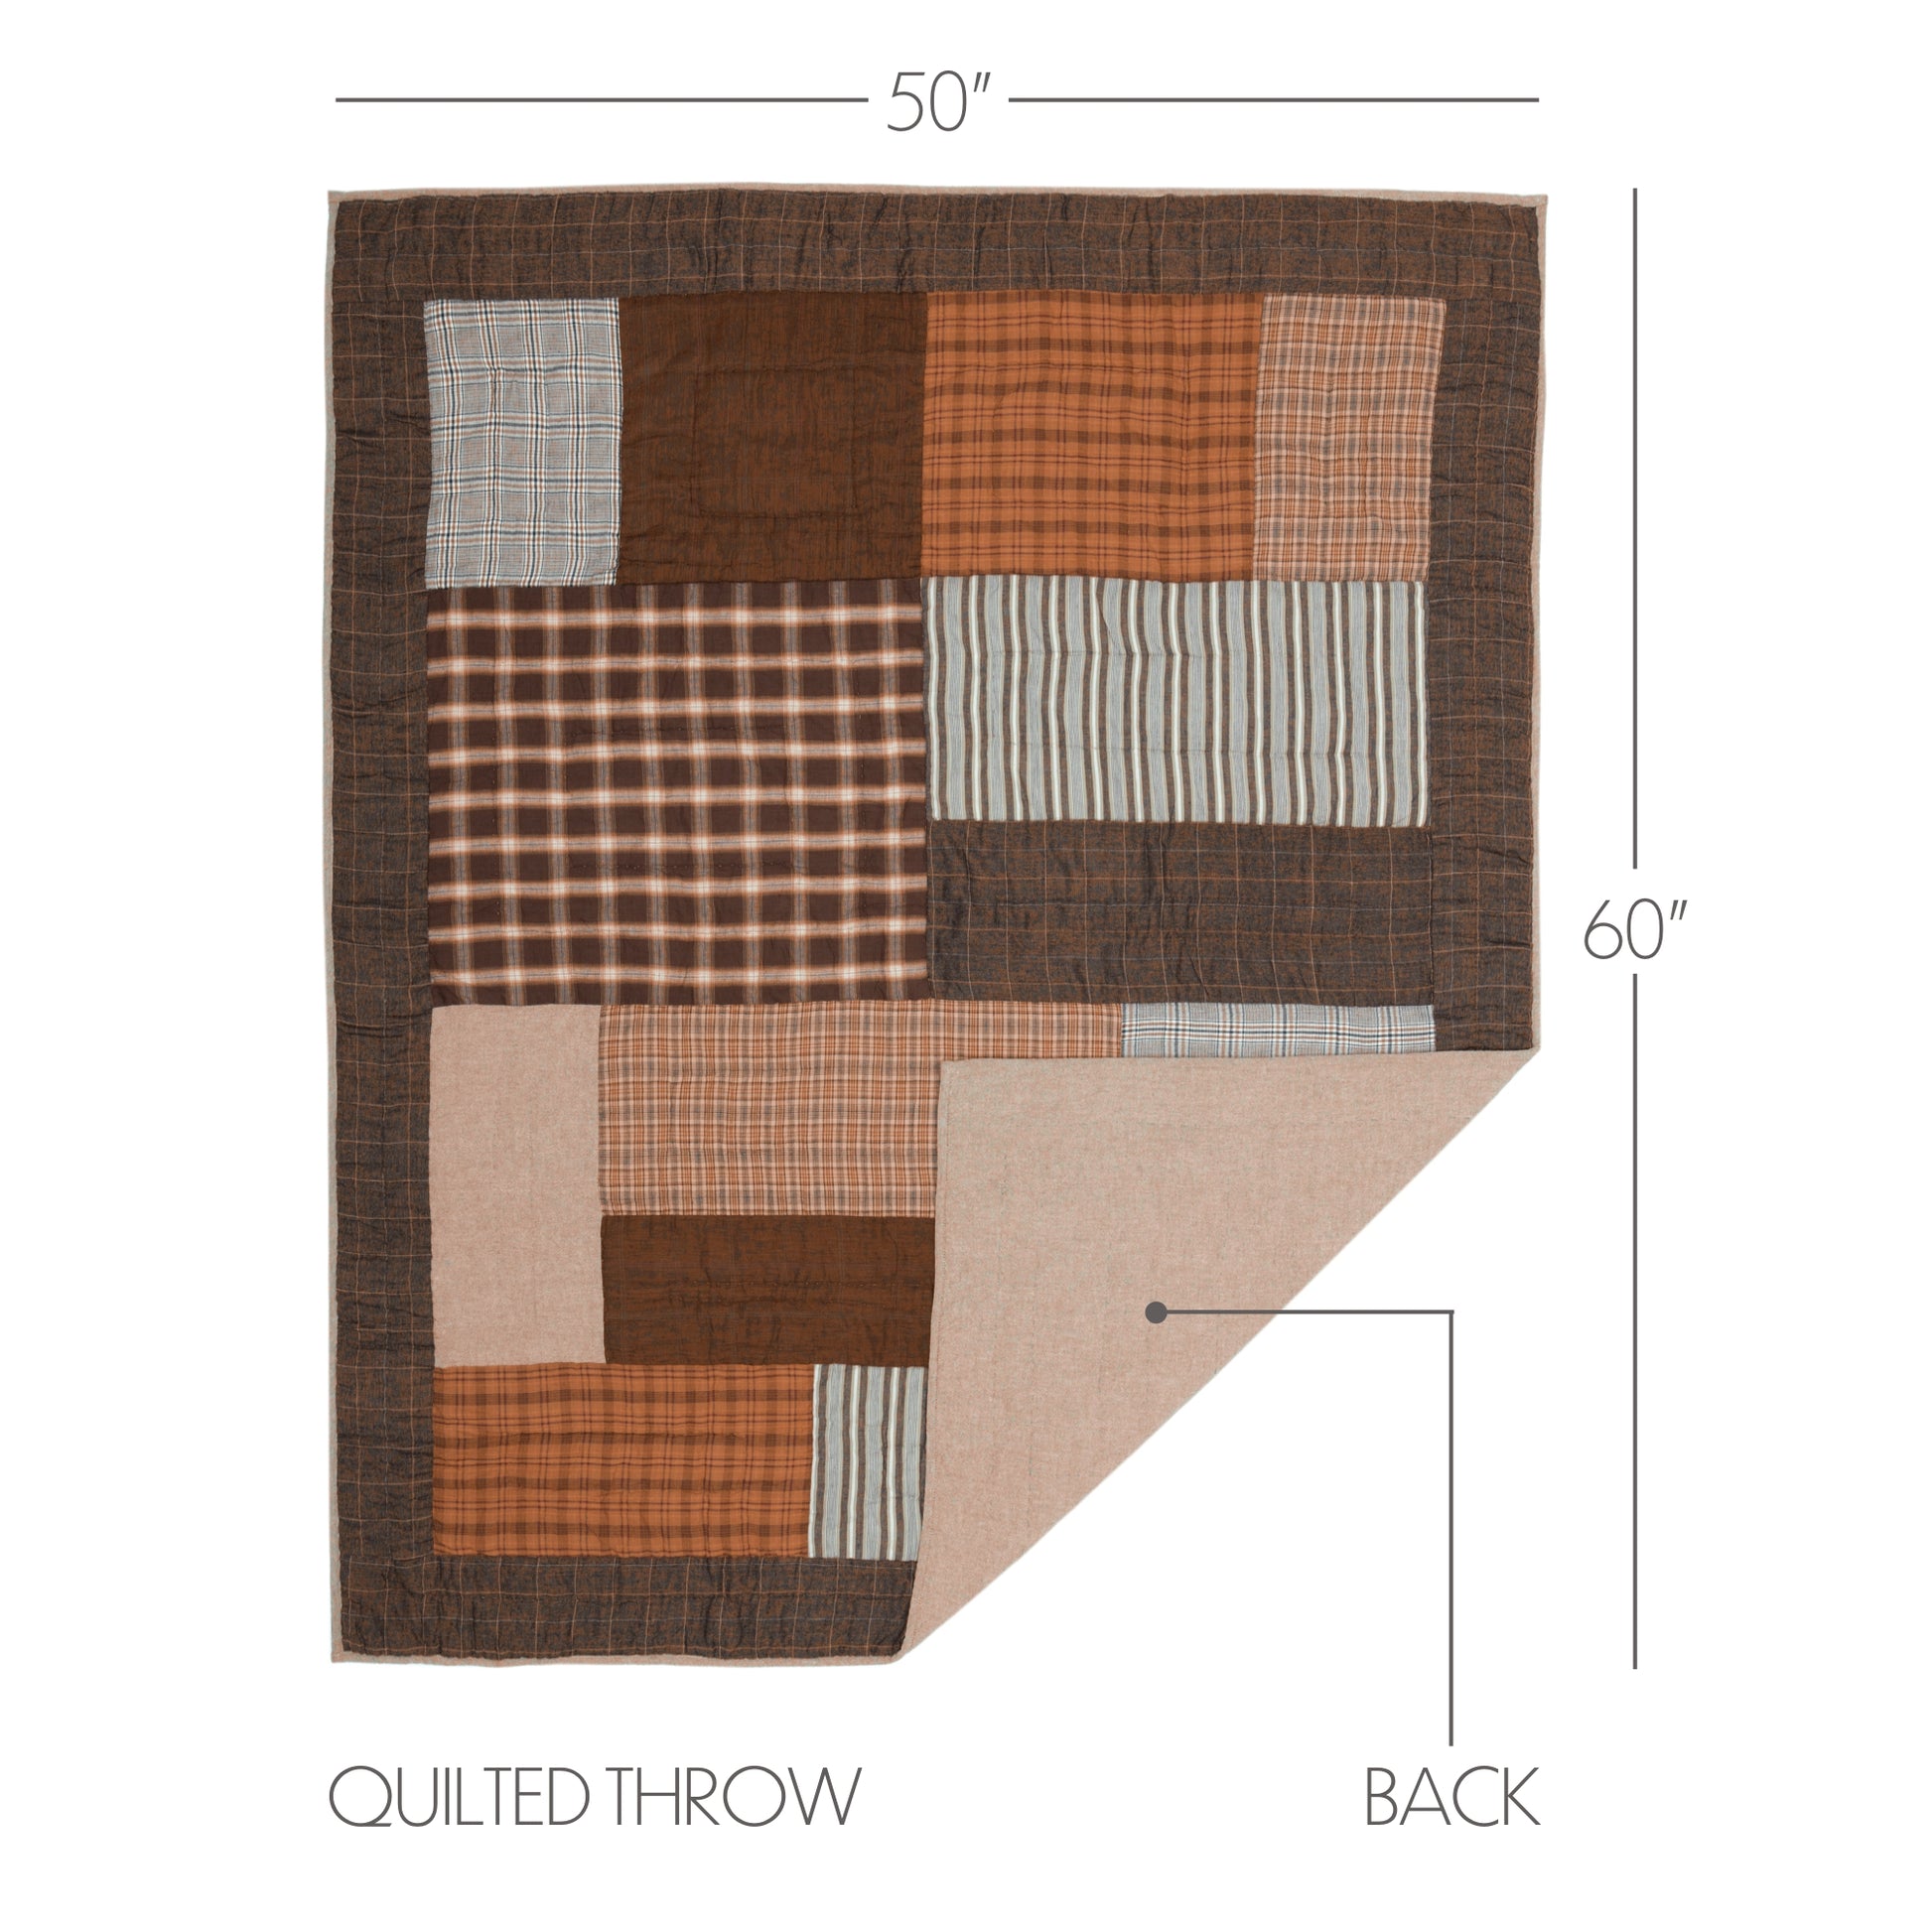 51251-Rory-Quilted-Throw-60x50-image-1